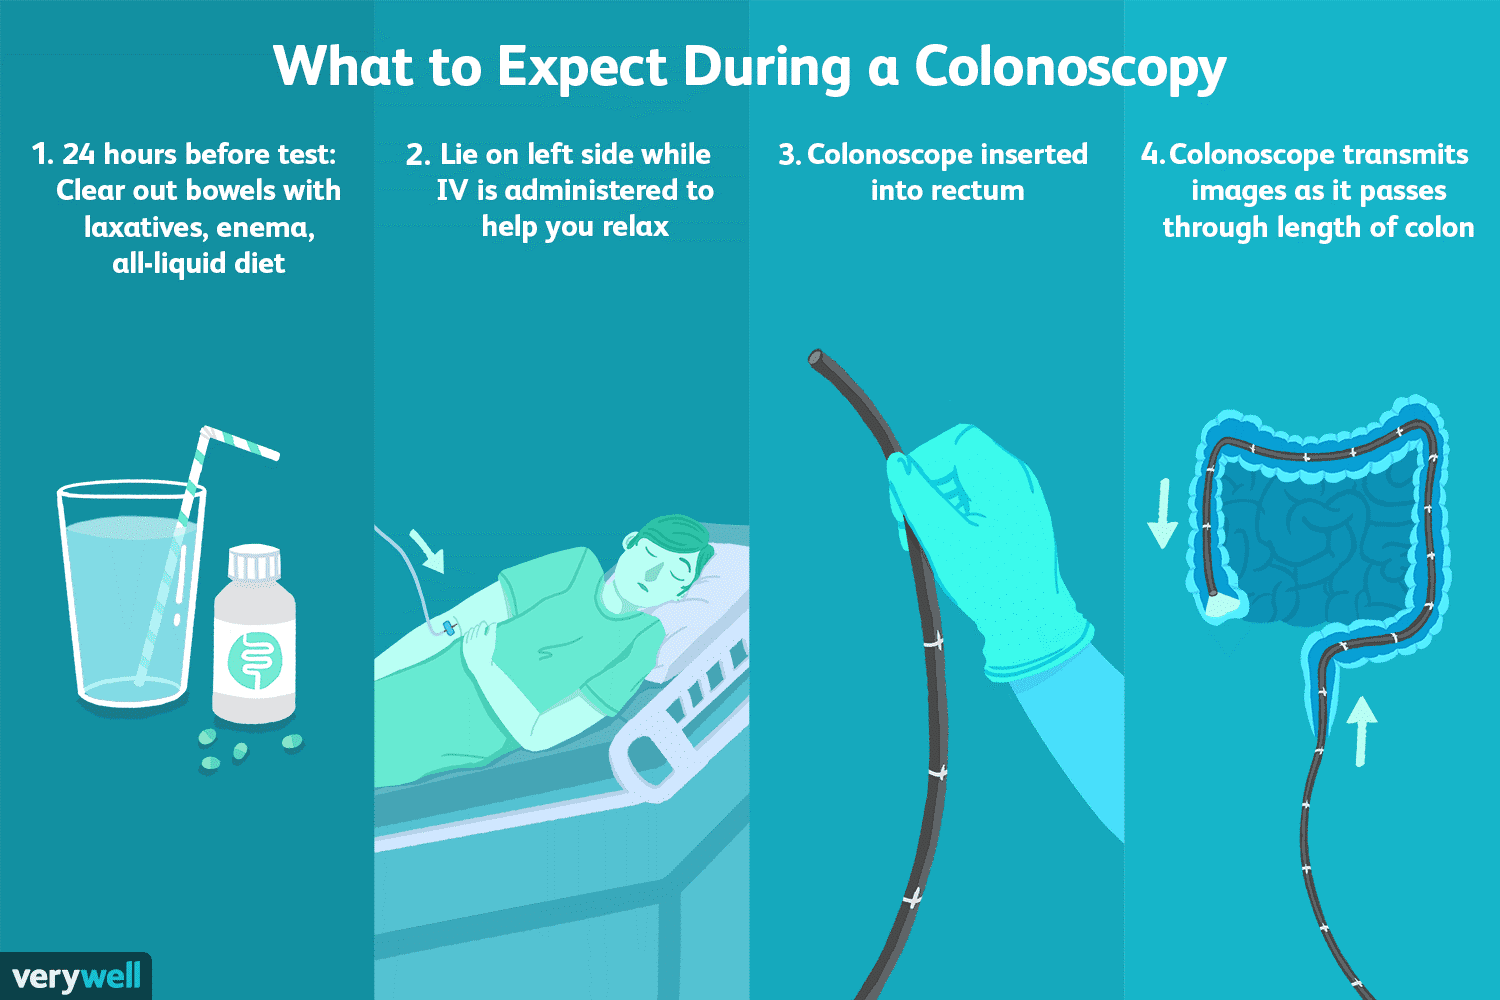 Optimizing Your Preventive Care: The Ideal Frequency For Colonoscopies